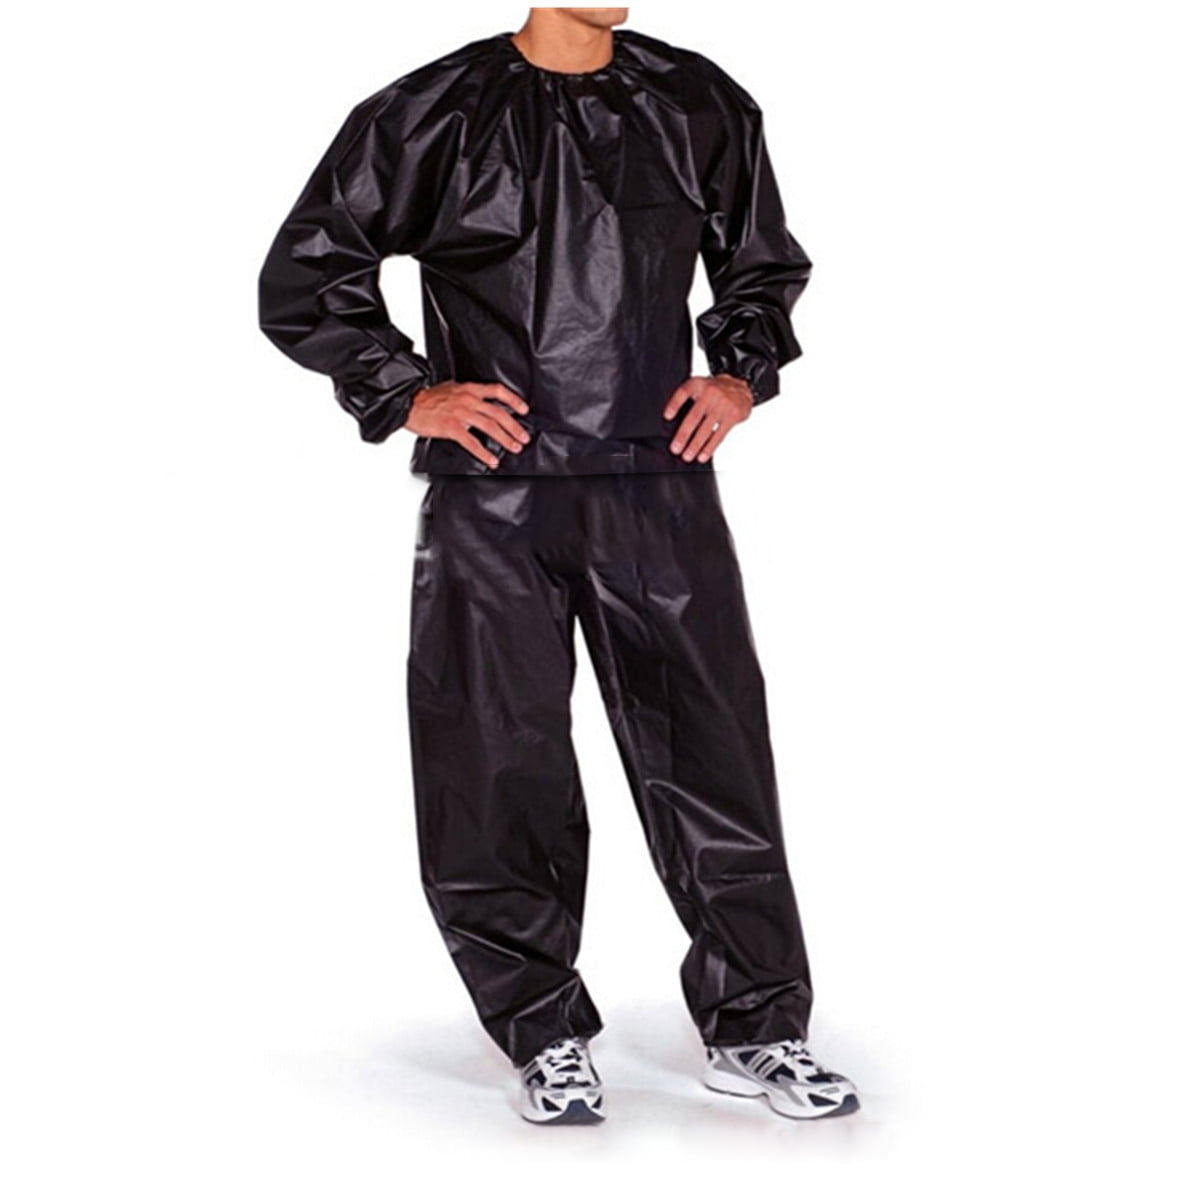 US Sauna Sweat Suit Fitness Slimming Weight Loss Exercise Running Boxing Gym PVC 